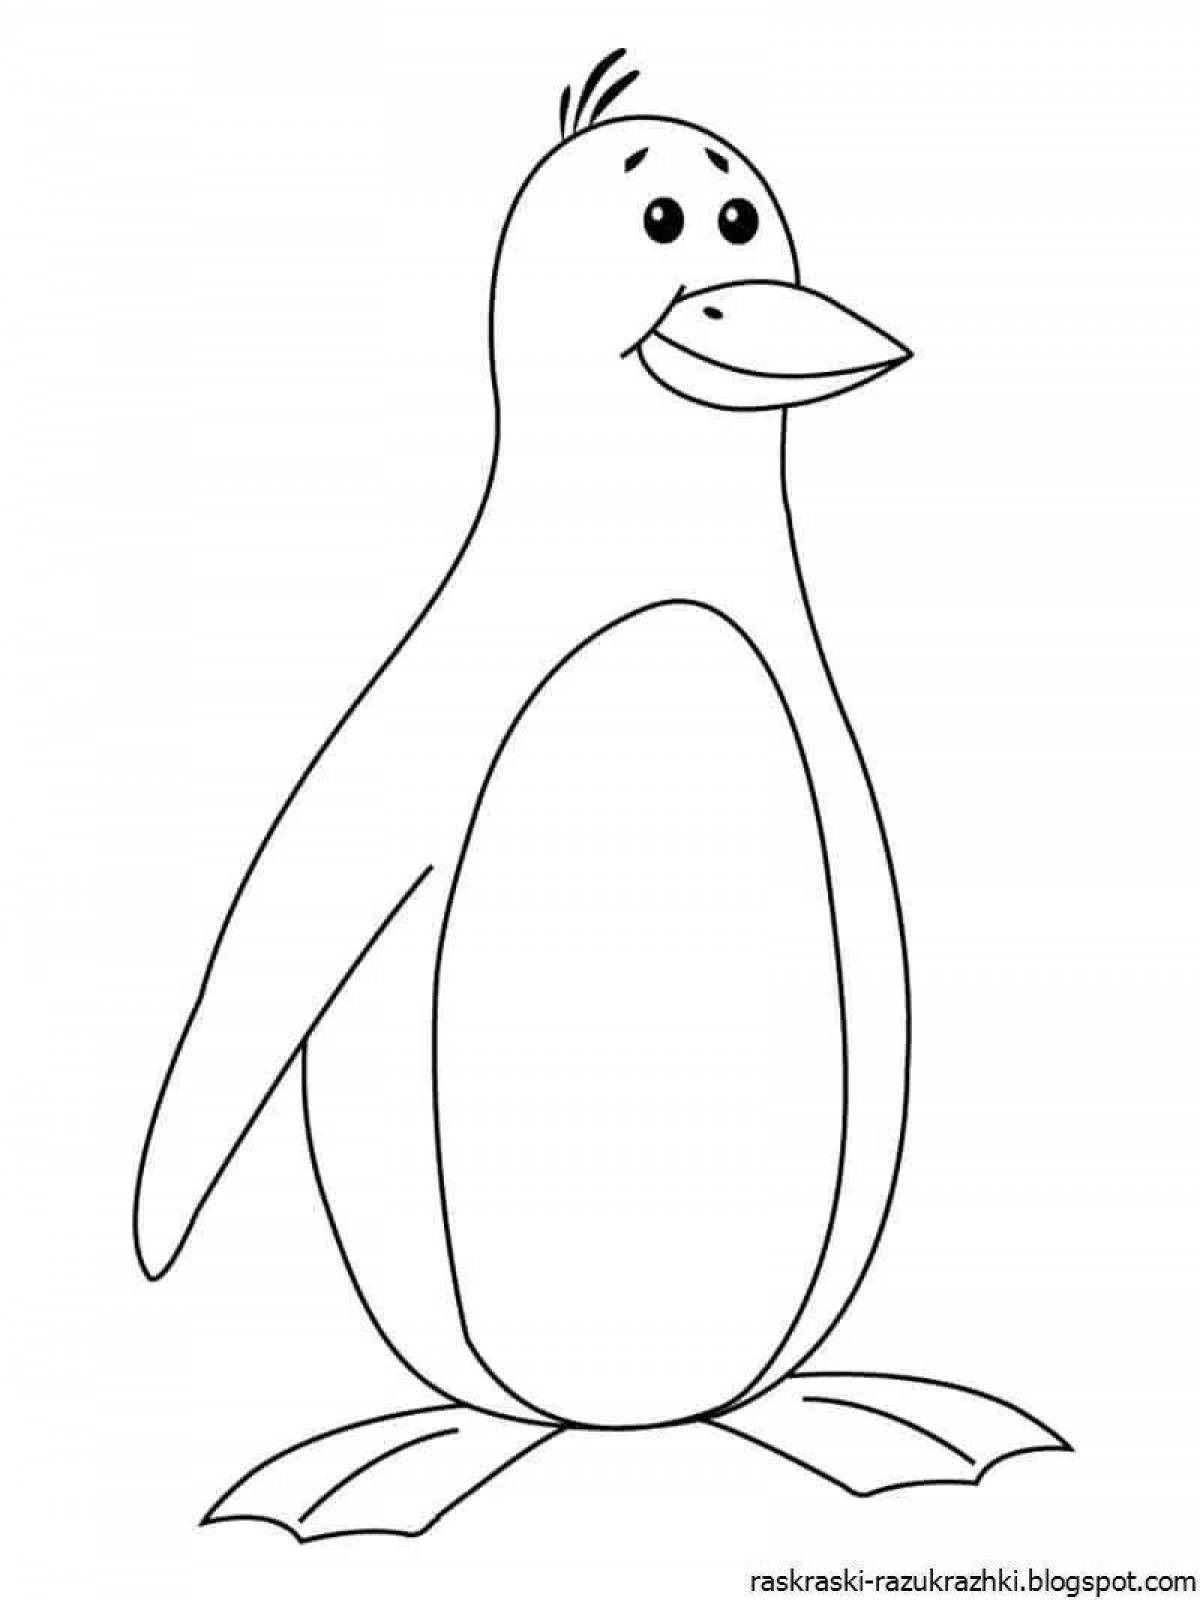 A funny penguin coloring book template